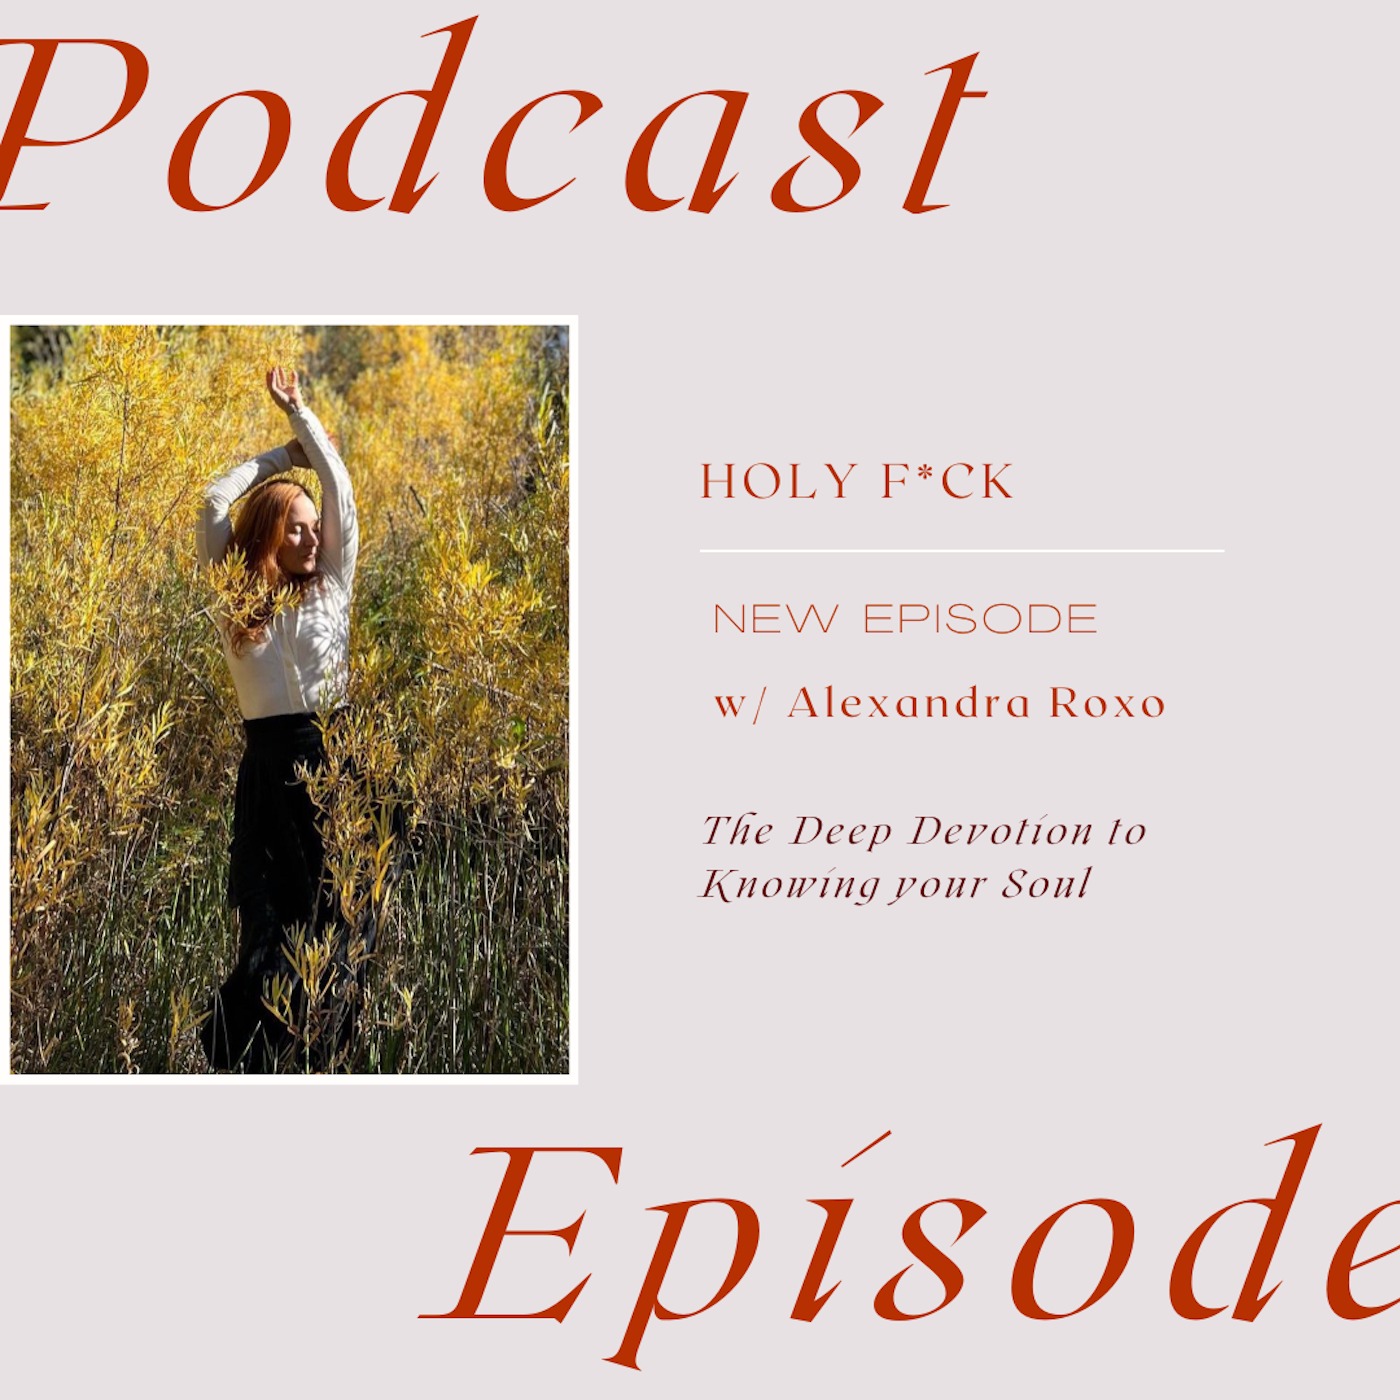 The Deep Devotion to Knowing your Soul with Alexandra Roxo